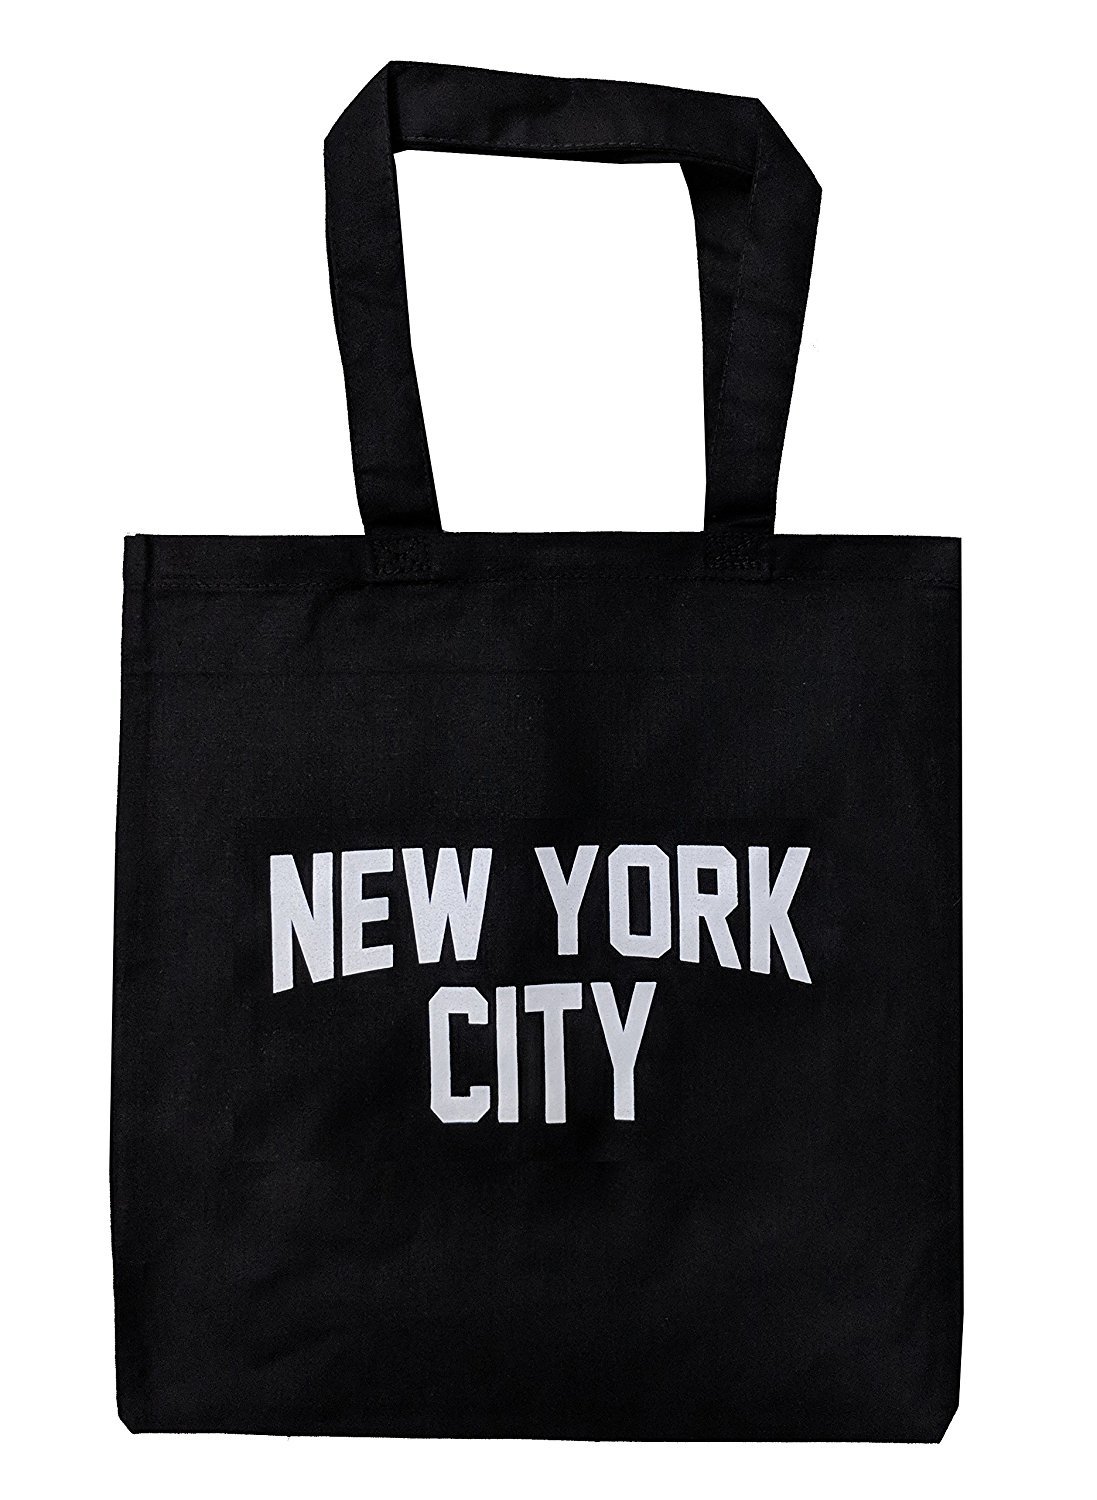 NYC Tote Bag New York City 100% Cotton Canvas Screenprinted Event NYC ...